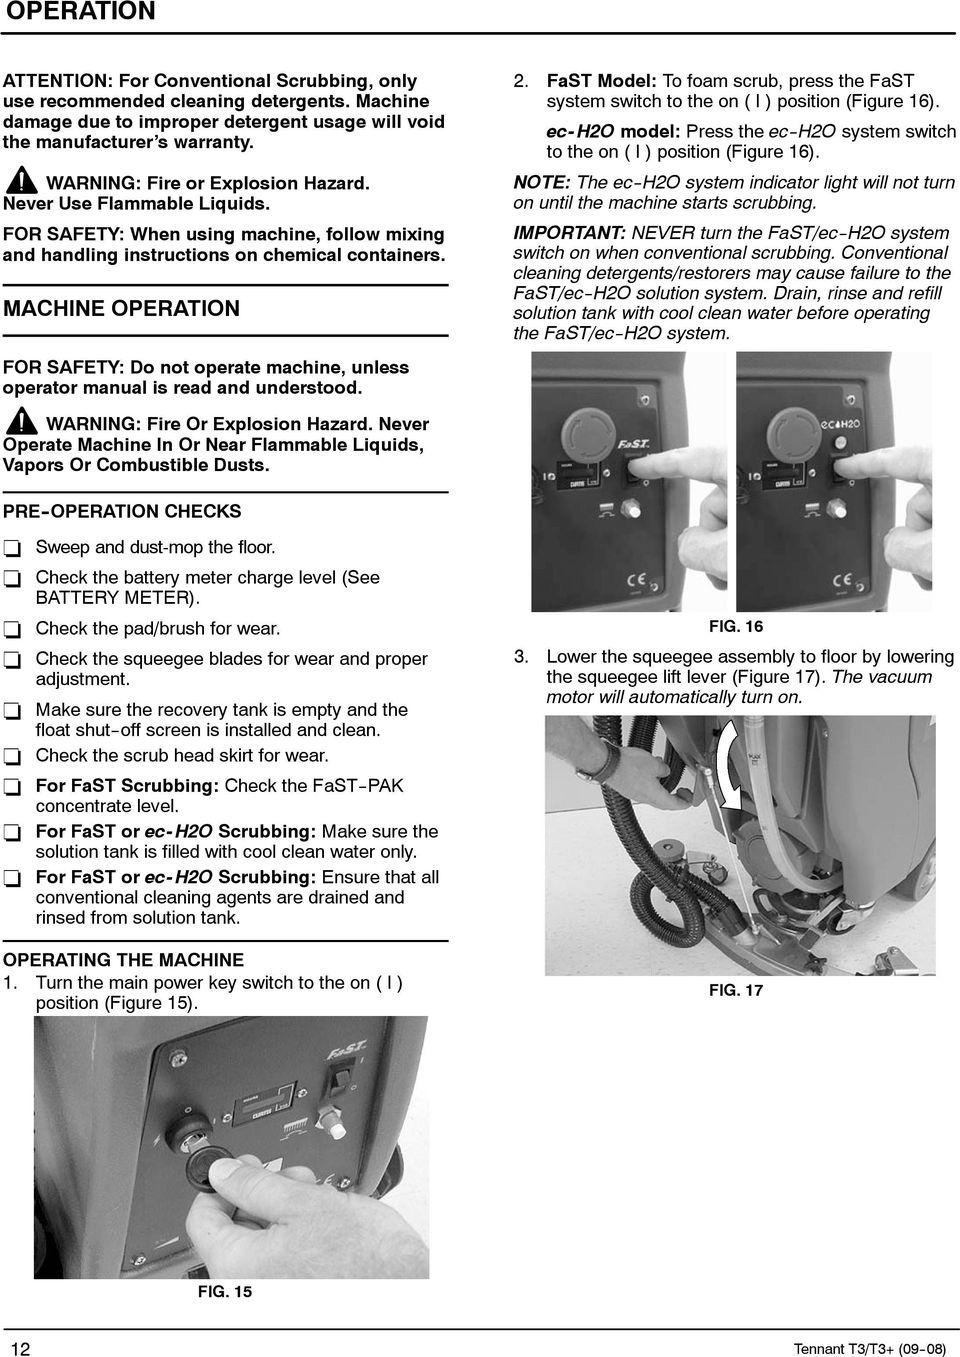 MACHINE OPERATION FOR SAFETY: Do not operate machine, unless operator manual is read and understood. 2. FaST Model: To foam scrub, press the FaST system switch to the on ( I ) position (Figure 16).